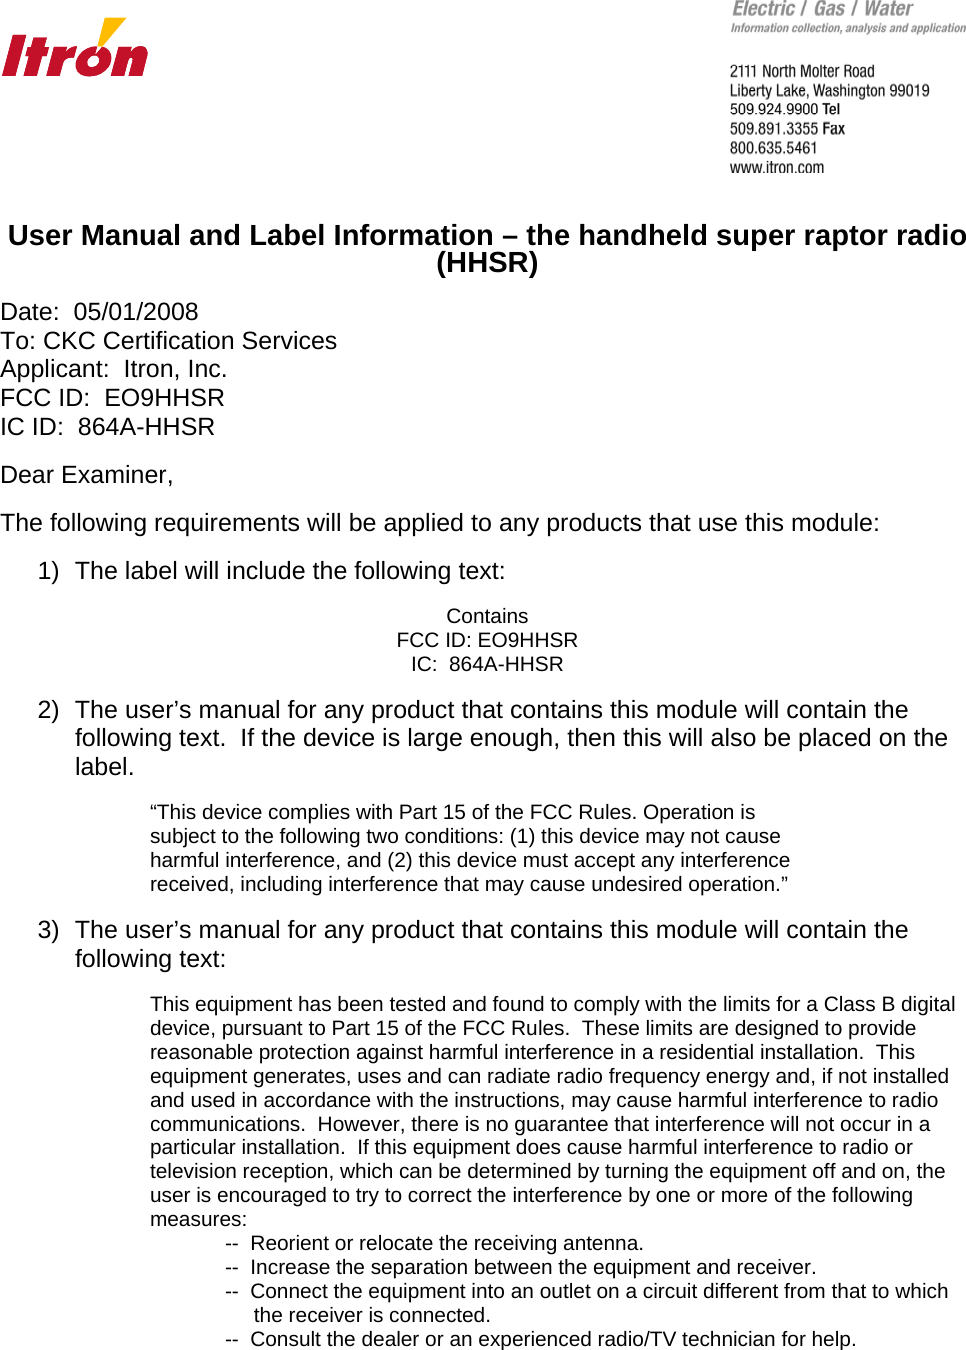       User Manual and Label Information – the handheld super raptor radio (HHSR)  Date:  05/01/2008 To: CKC Certification Services Applicant:  Itron, Inc. FCC ID:  EO9HHSR IC ID:  864A-HHSR  Dear Examiner,  The following requirements will be applied to any products that use this module:  1)  The label will include the following text:  Contains FCC ID: EO9HHSR IC:  864A-HHSR  2)  The user’s manual for any product that contains this module will contain the following text.  If the device is large enough, then this will also be placed on the label.  “This device complies with Part 15 of the FCC Rules. Operation is subject to the following two conditions: (1) this device may not cause harmful interference, and (2) this device must accept any interference received, including interference that may cause undesired operation.”  3)  The user’s manual for any product that contains this module will contain the following text:      This equipment has been tested and found to comply with the limits for a Class B digital      device, pursuant to Part 15 of the FCC Rules.  These limits are designed to provide      reasonable protection against harmful interference in a residential installation.  This      equipment generates, uses and can radiate radio frequency energy and, if not installed      and used in accordance with the instructions, may cause harmful interference to radio      communications.  However, there is no guarantee that interference will not occur in a      particular installation.  If this equipment does cause harmful interference to radio or      television reception, which can be determined by turning the equipment off and on, the      user is encouraged to try to correct the interference by one or more of the following    measures:       --  Reorient or relocate the receiving antenna.       --  Increase the separation between the equipment and receiver.       --  Connect the equipment into an outlet on a circuit different from that to which             the receiver is connected.       --  Consult the dealer or an experienced radio/TV technician for help.    